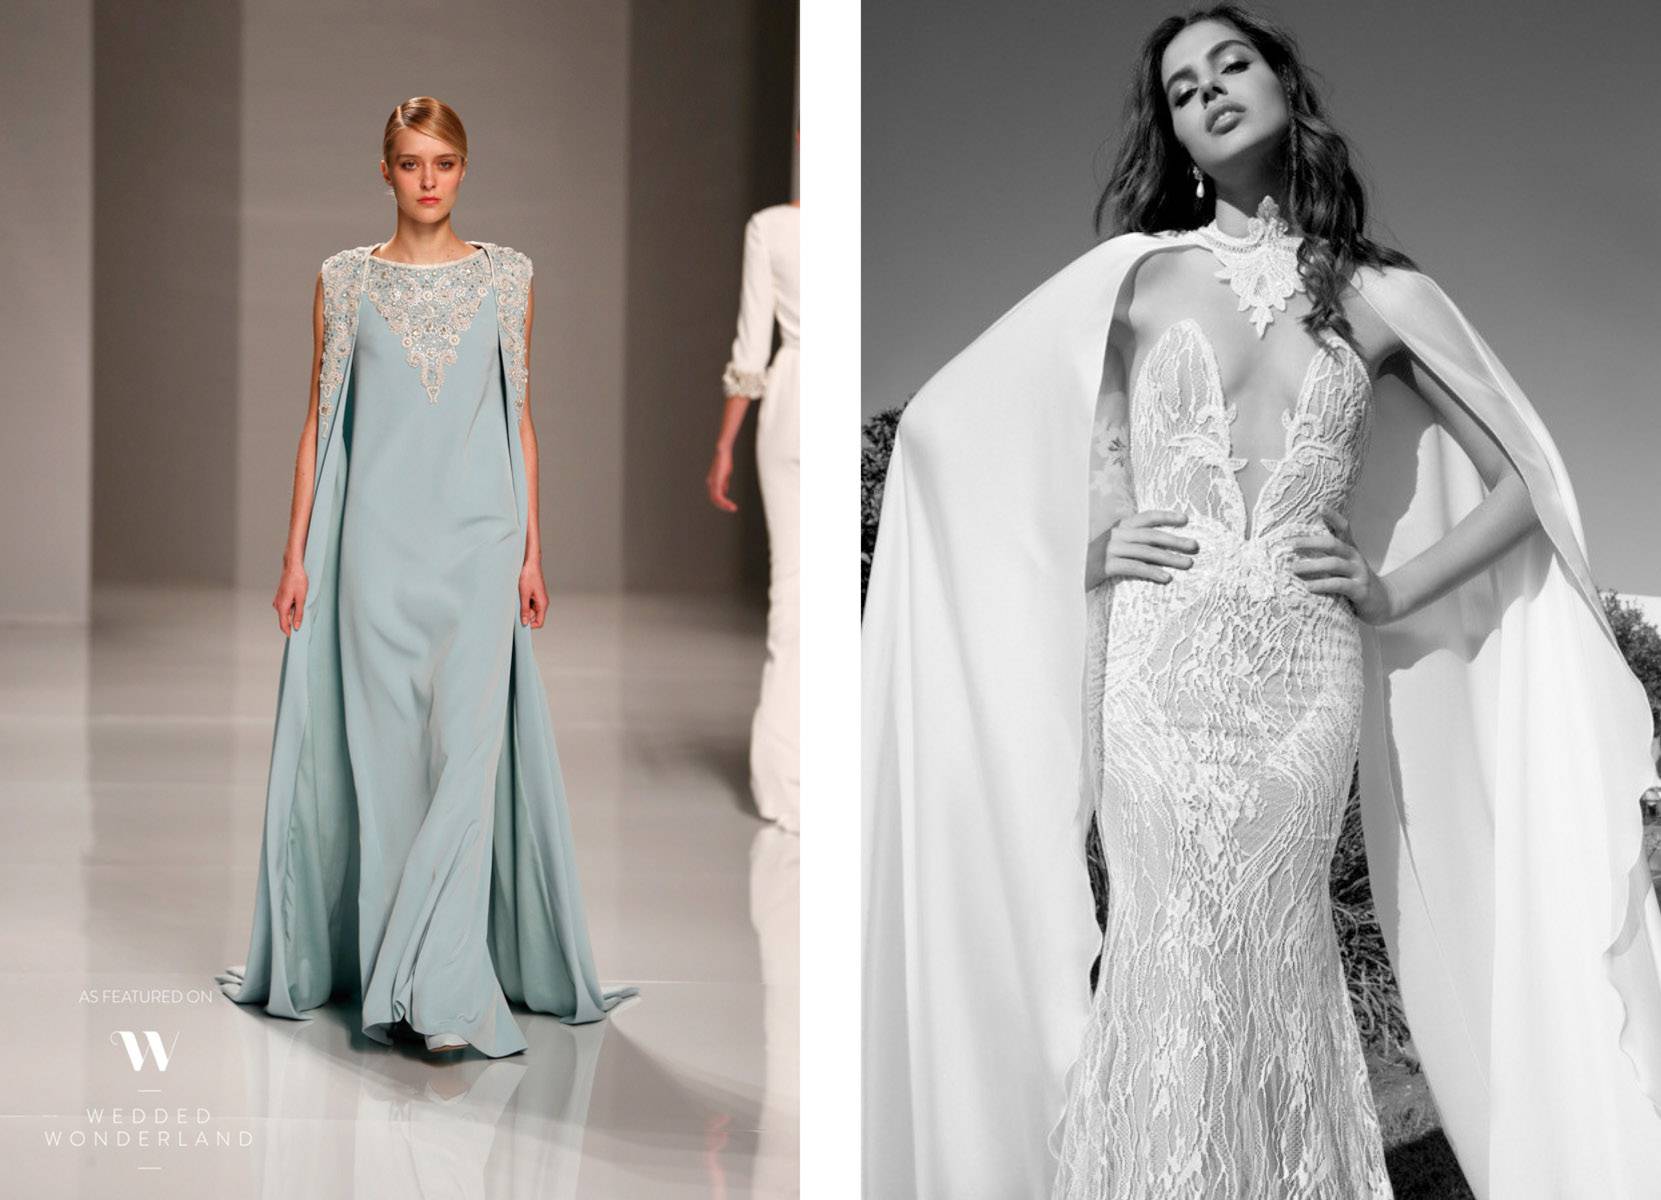 BRIDAL CAPES: THE RISE OF THE SUPER WOMAN | Wedded Wonderland